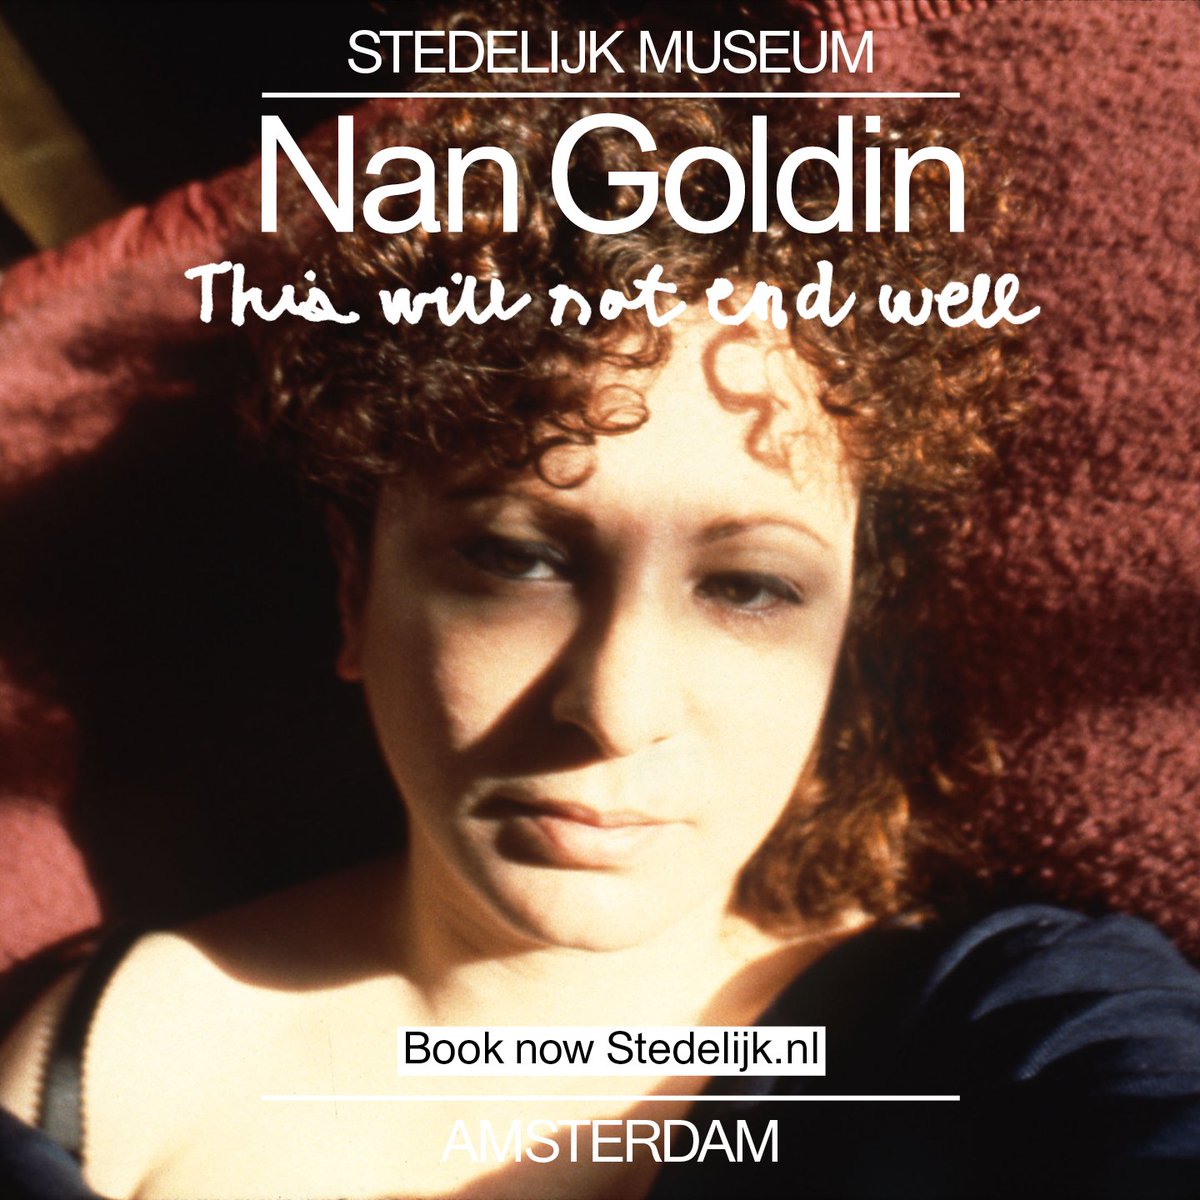 NEW! 'This Will Not End Well' by Nan Goldin is on view from this Sat. Book your tickets now: brnw.ch/21wD7PG As a filmmaker, Goldin will present slideshows consisting of thousands of photos in six unique buildings, supported by music, voice-overs, and archive material.